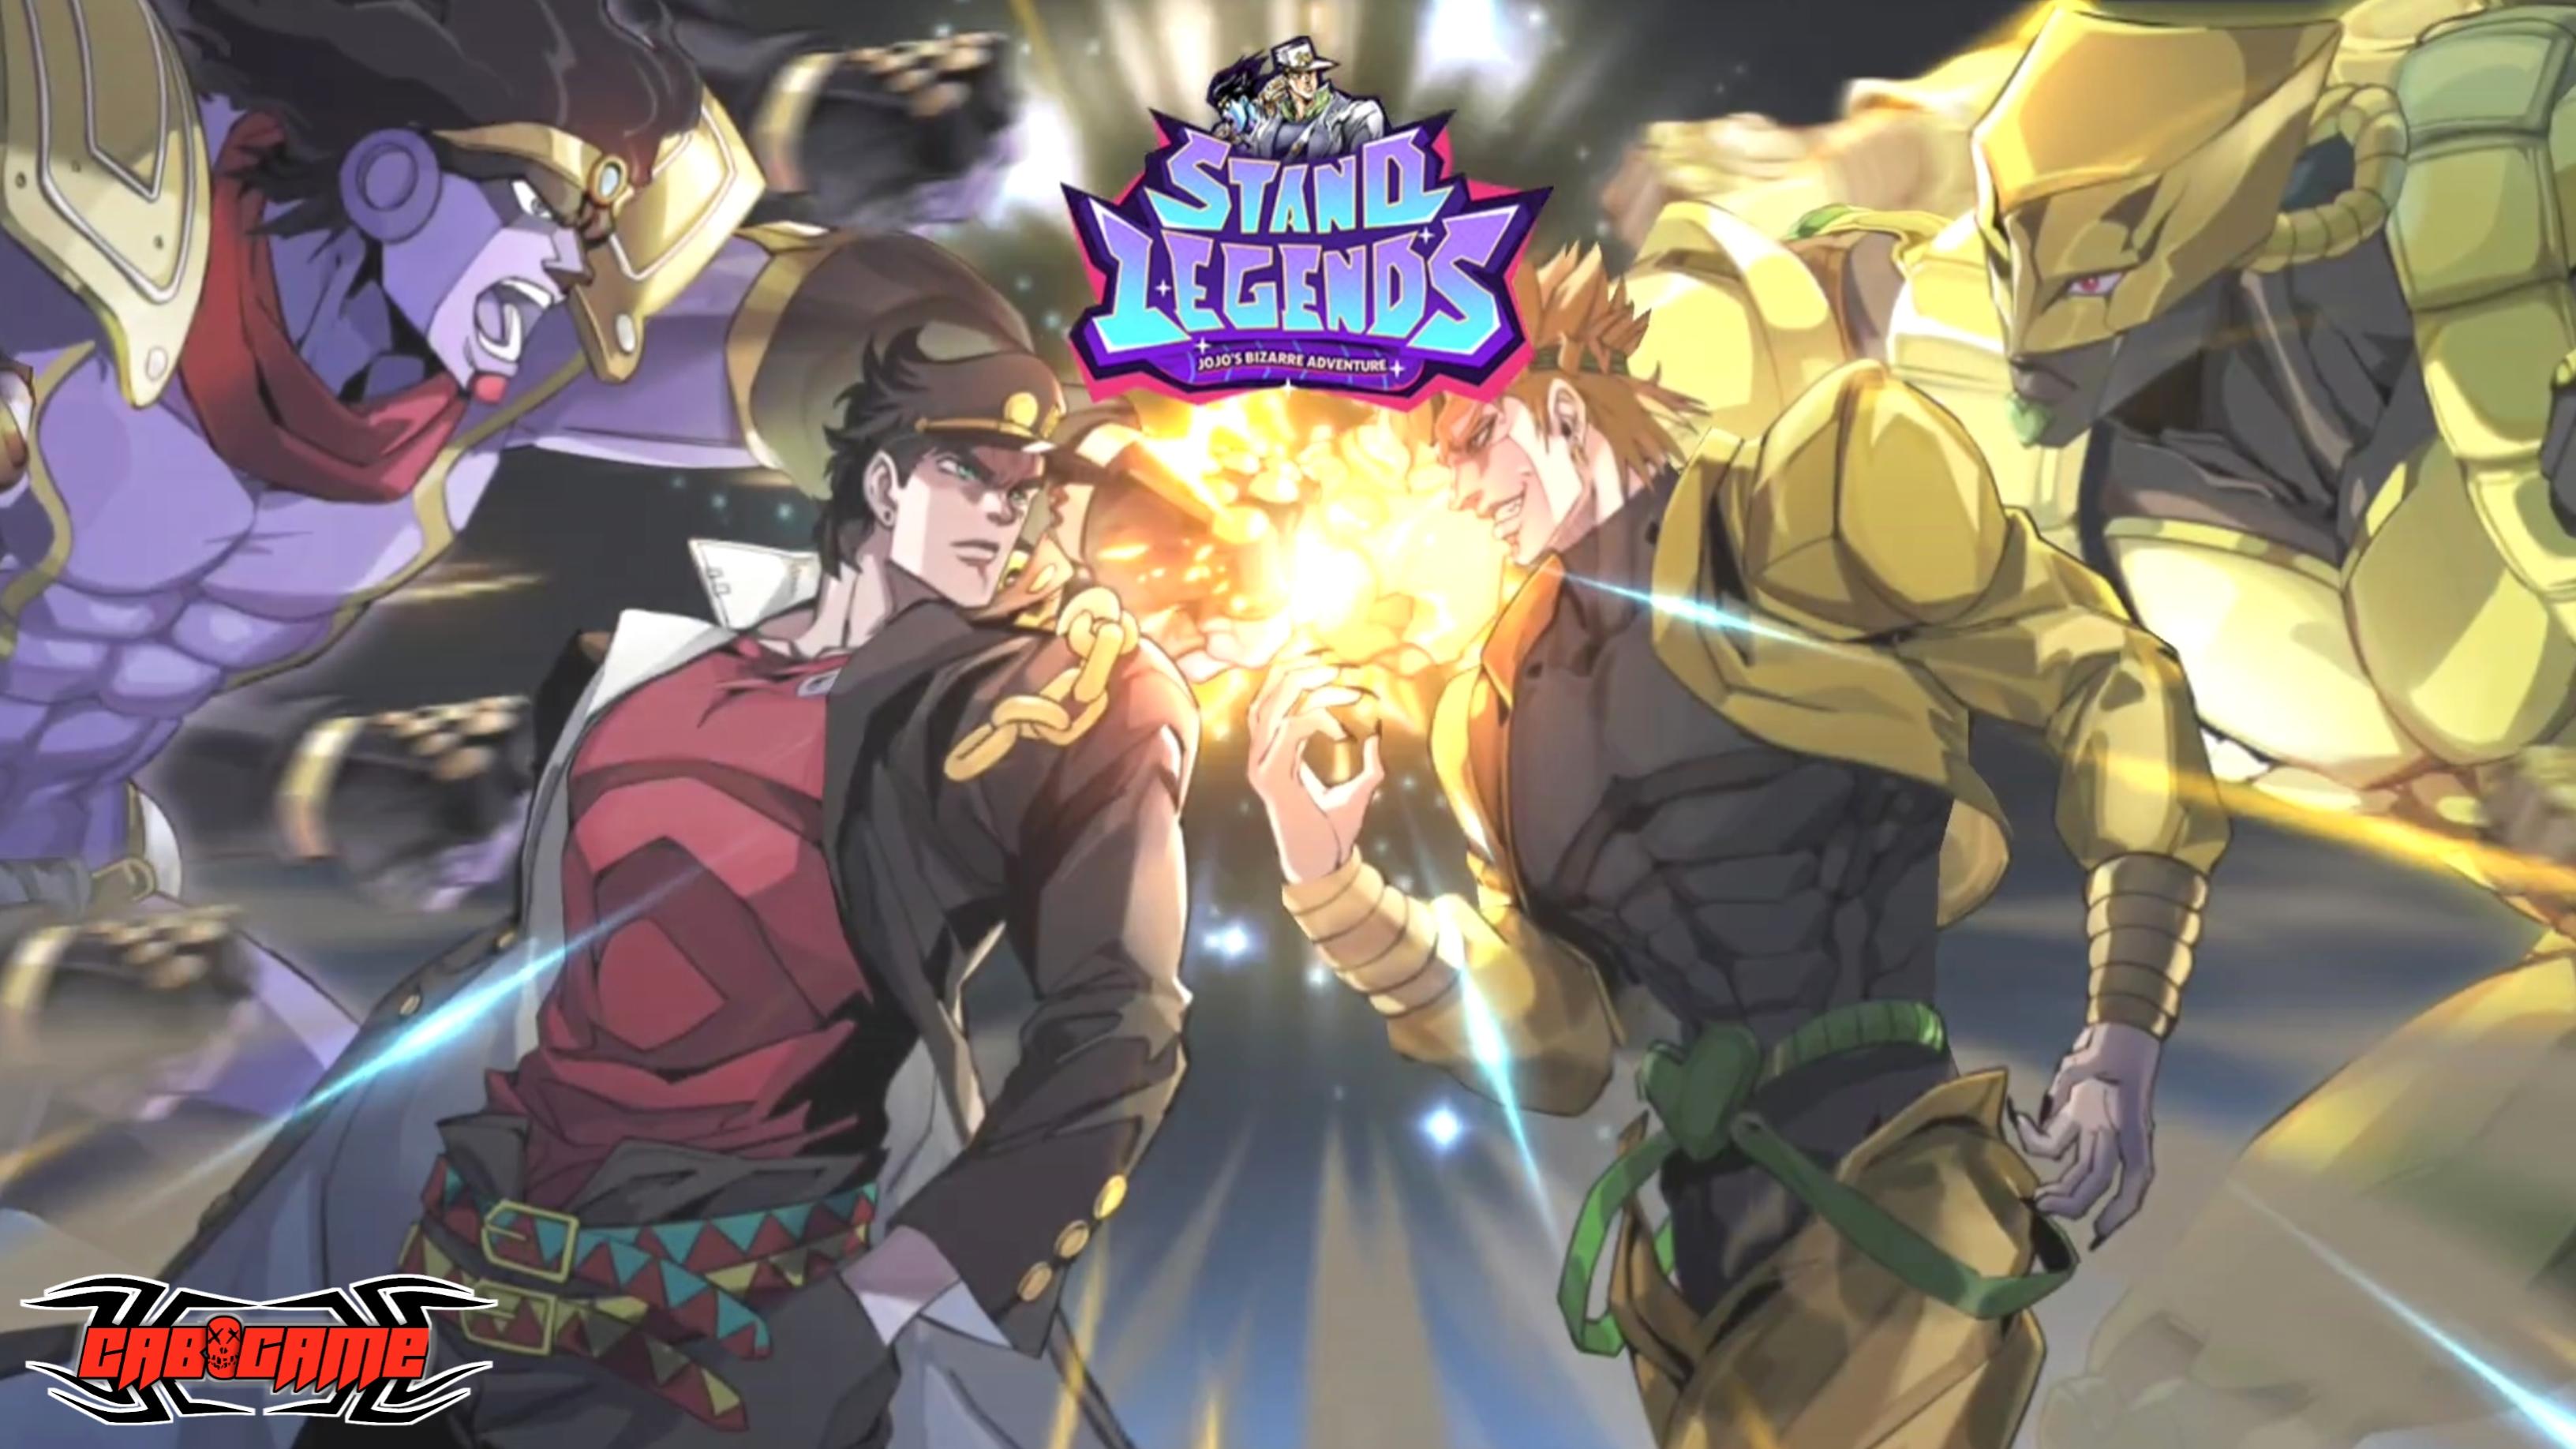 New Game ] Stand Legends Gameplay - Android APK iOS PC Download